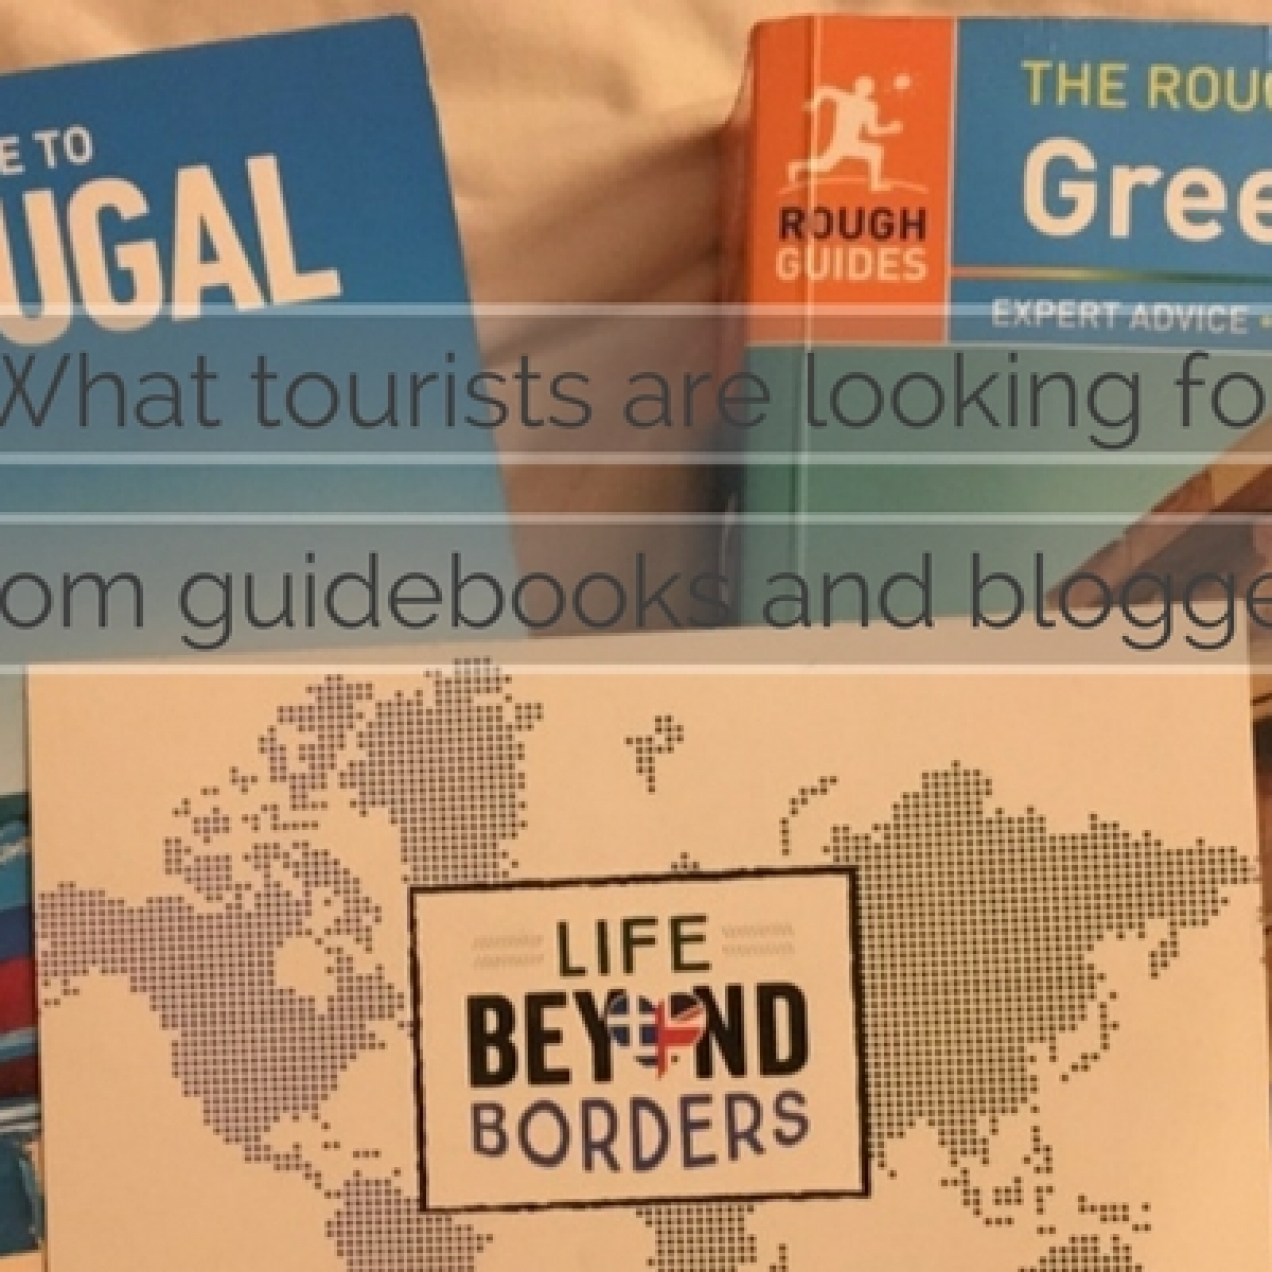 What tourists are looking for before visiting a destination – from bloggers and guidebooks